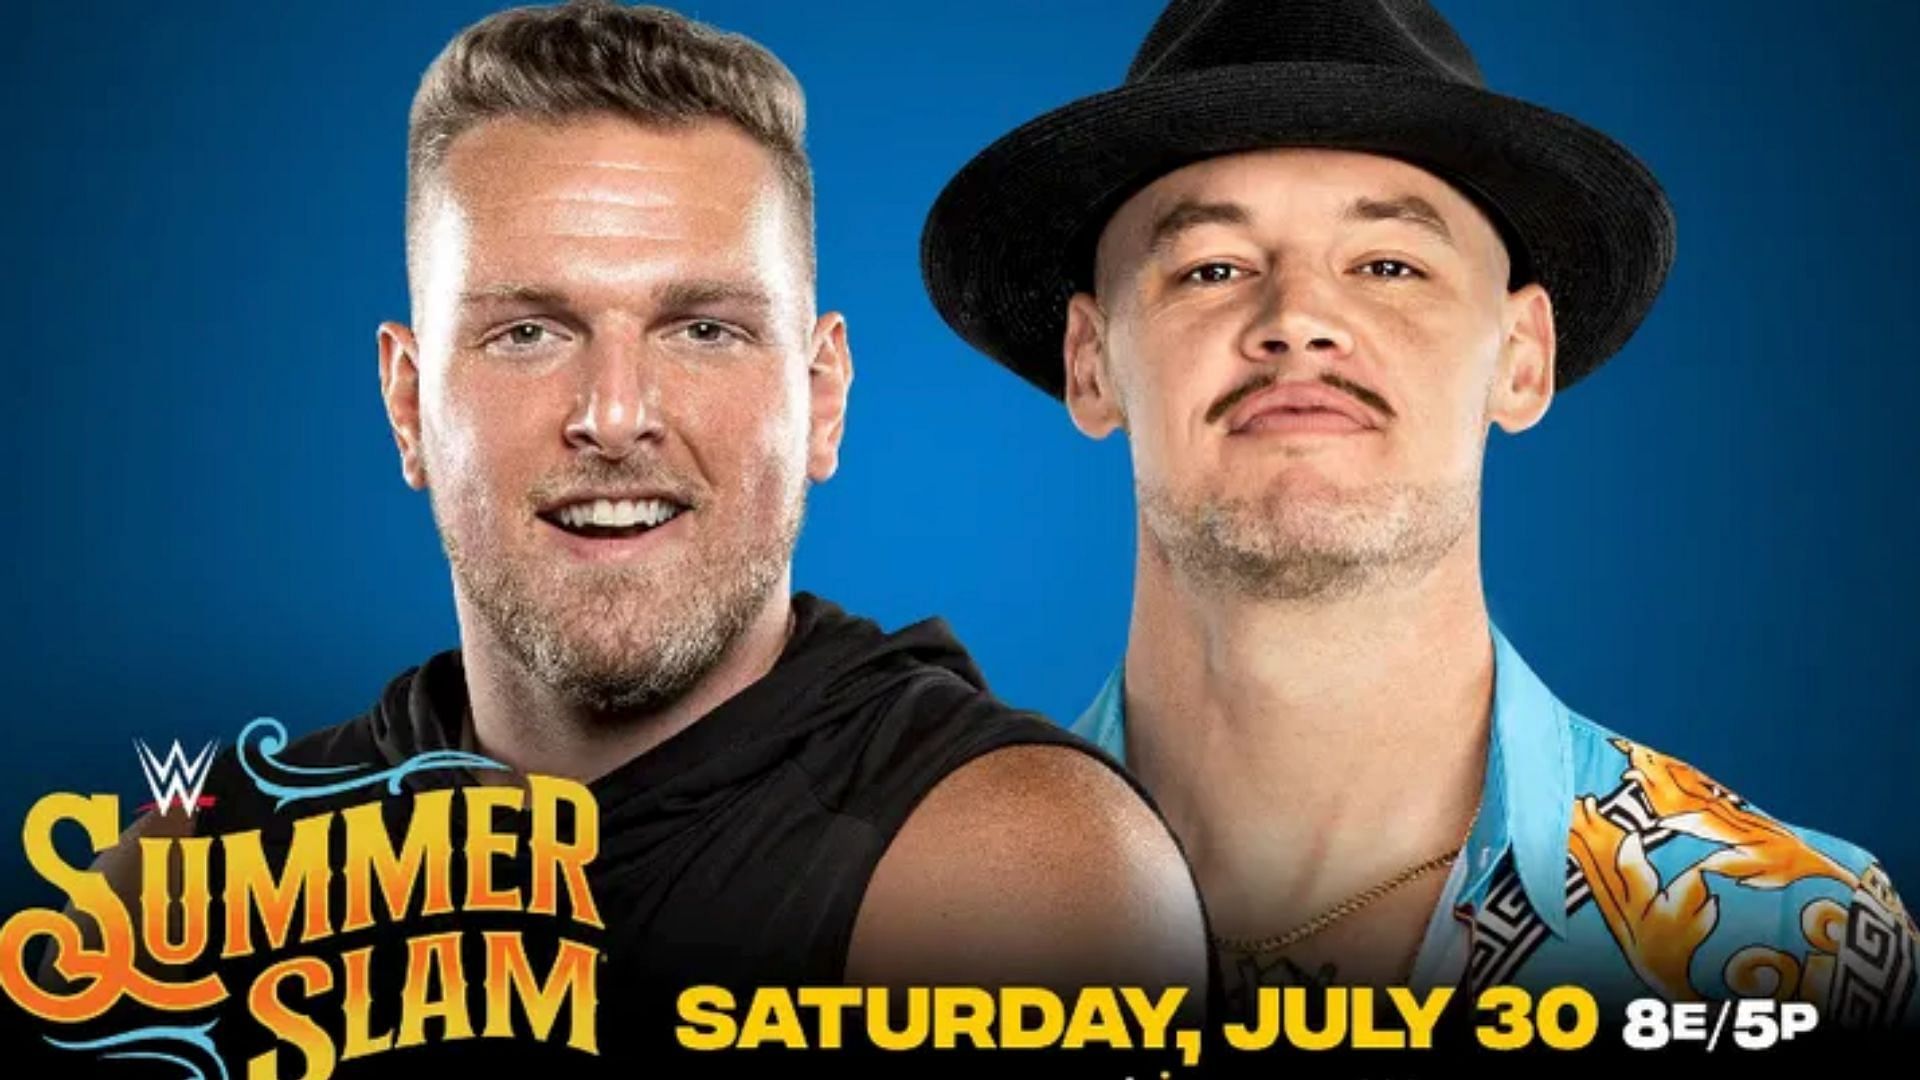 Pat McAfee vs. Happy Corbin made official for WWE SummerSlam